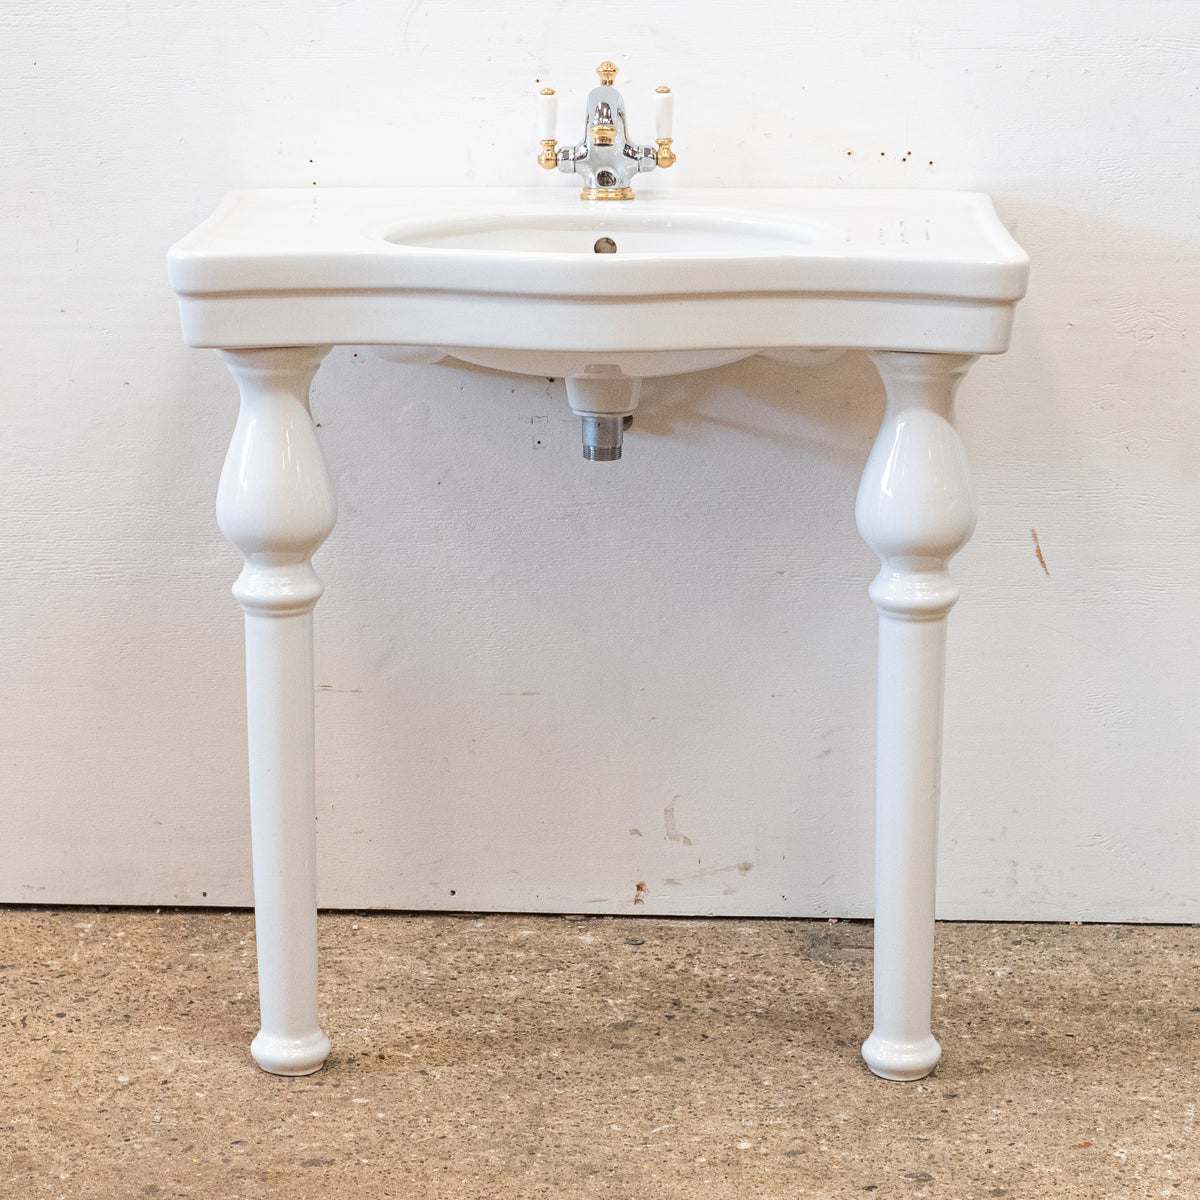 Reclaimed Console Basins on Legs | Pair available | The Architectural Forum